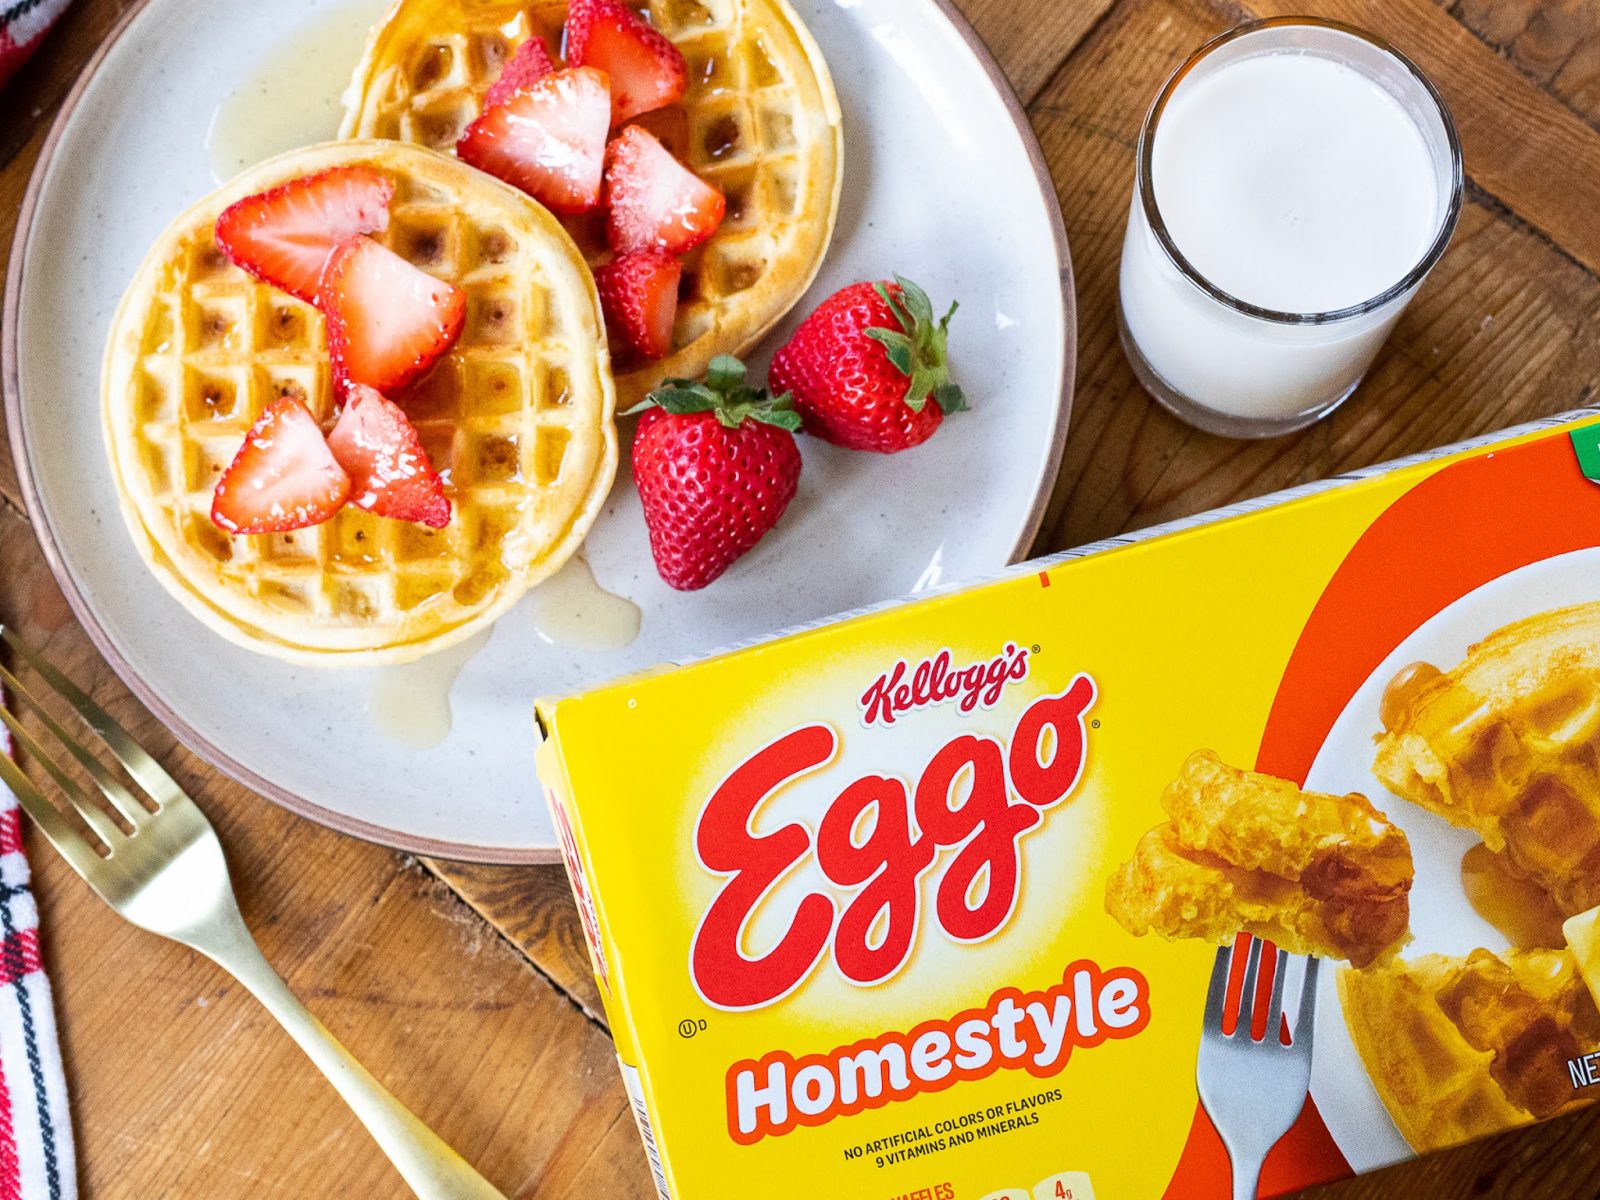 Get The Boxes Of Kellogg’s Eggo Waffles For Just $2.49 At Kroger